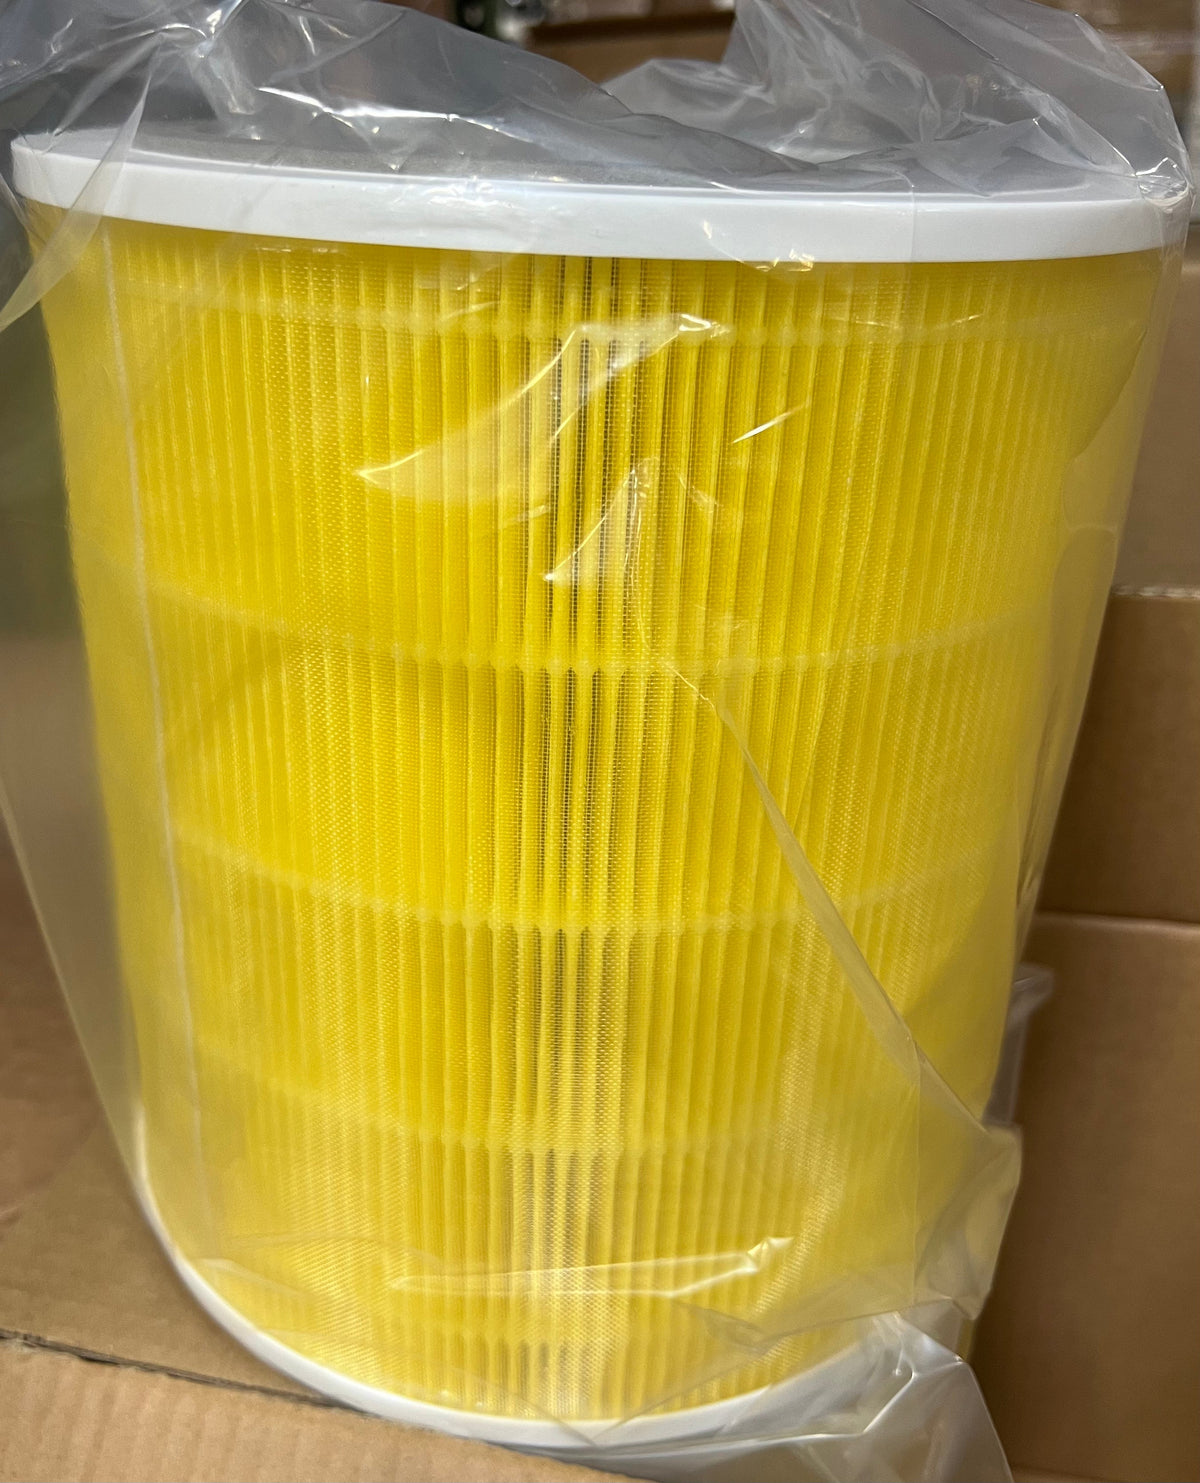 C-L44 Core 400S Pet Allergy Replacement Filter 2 Pack, Compatible With LEVOIT Core 400S (Yellow)